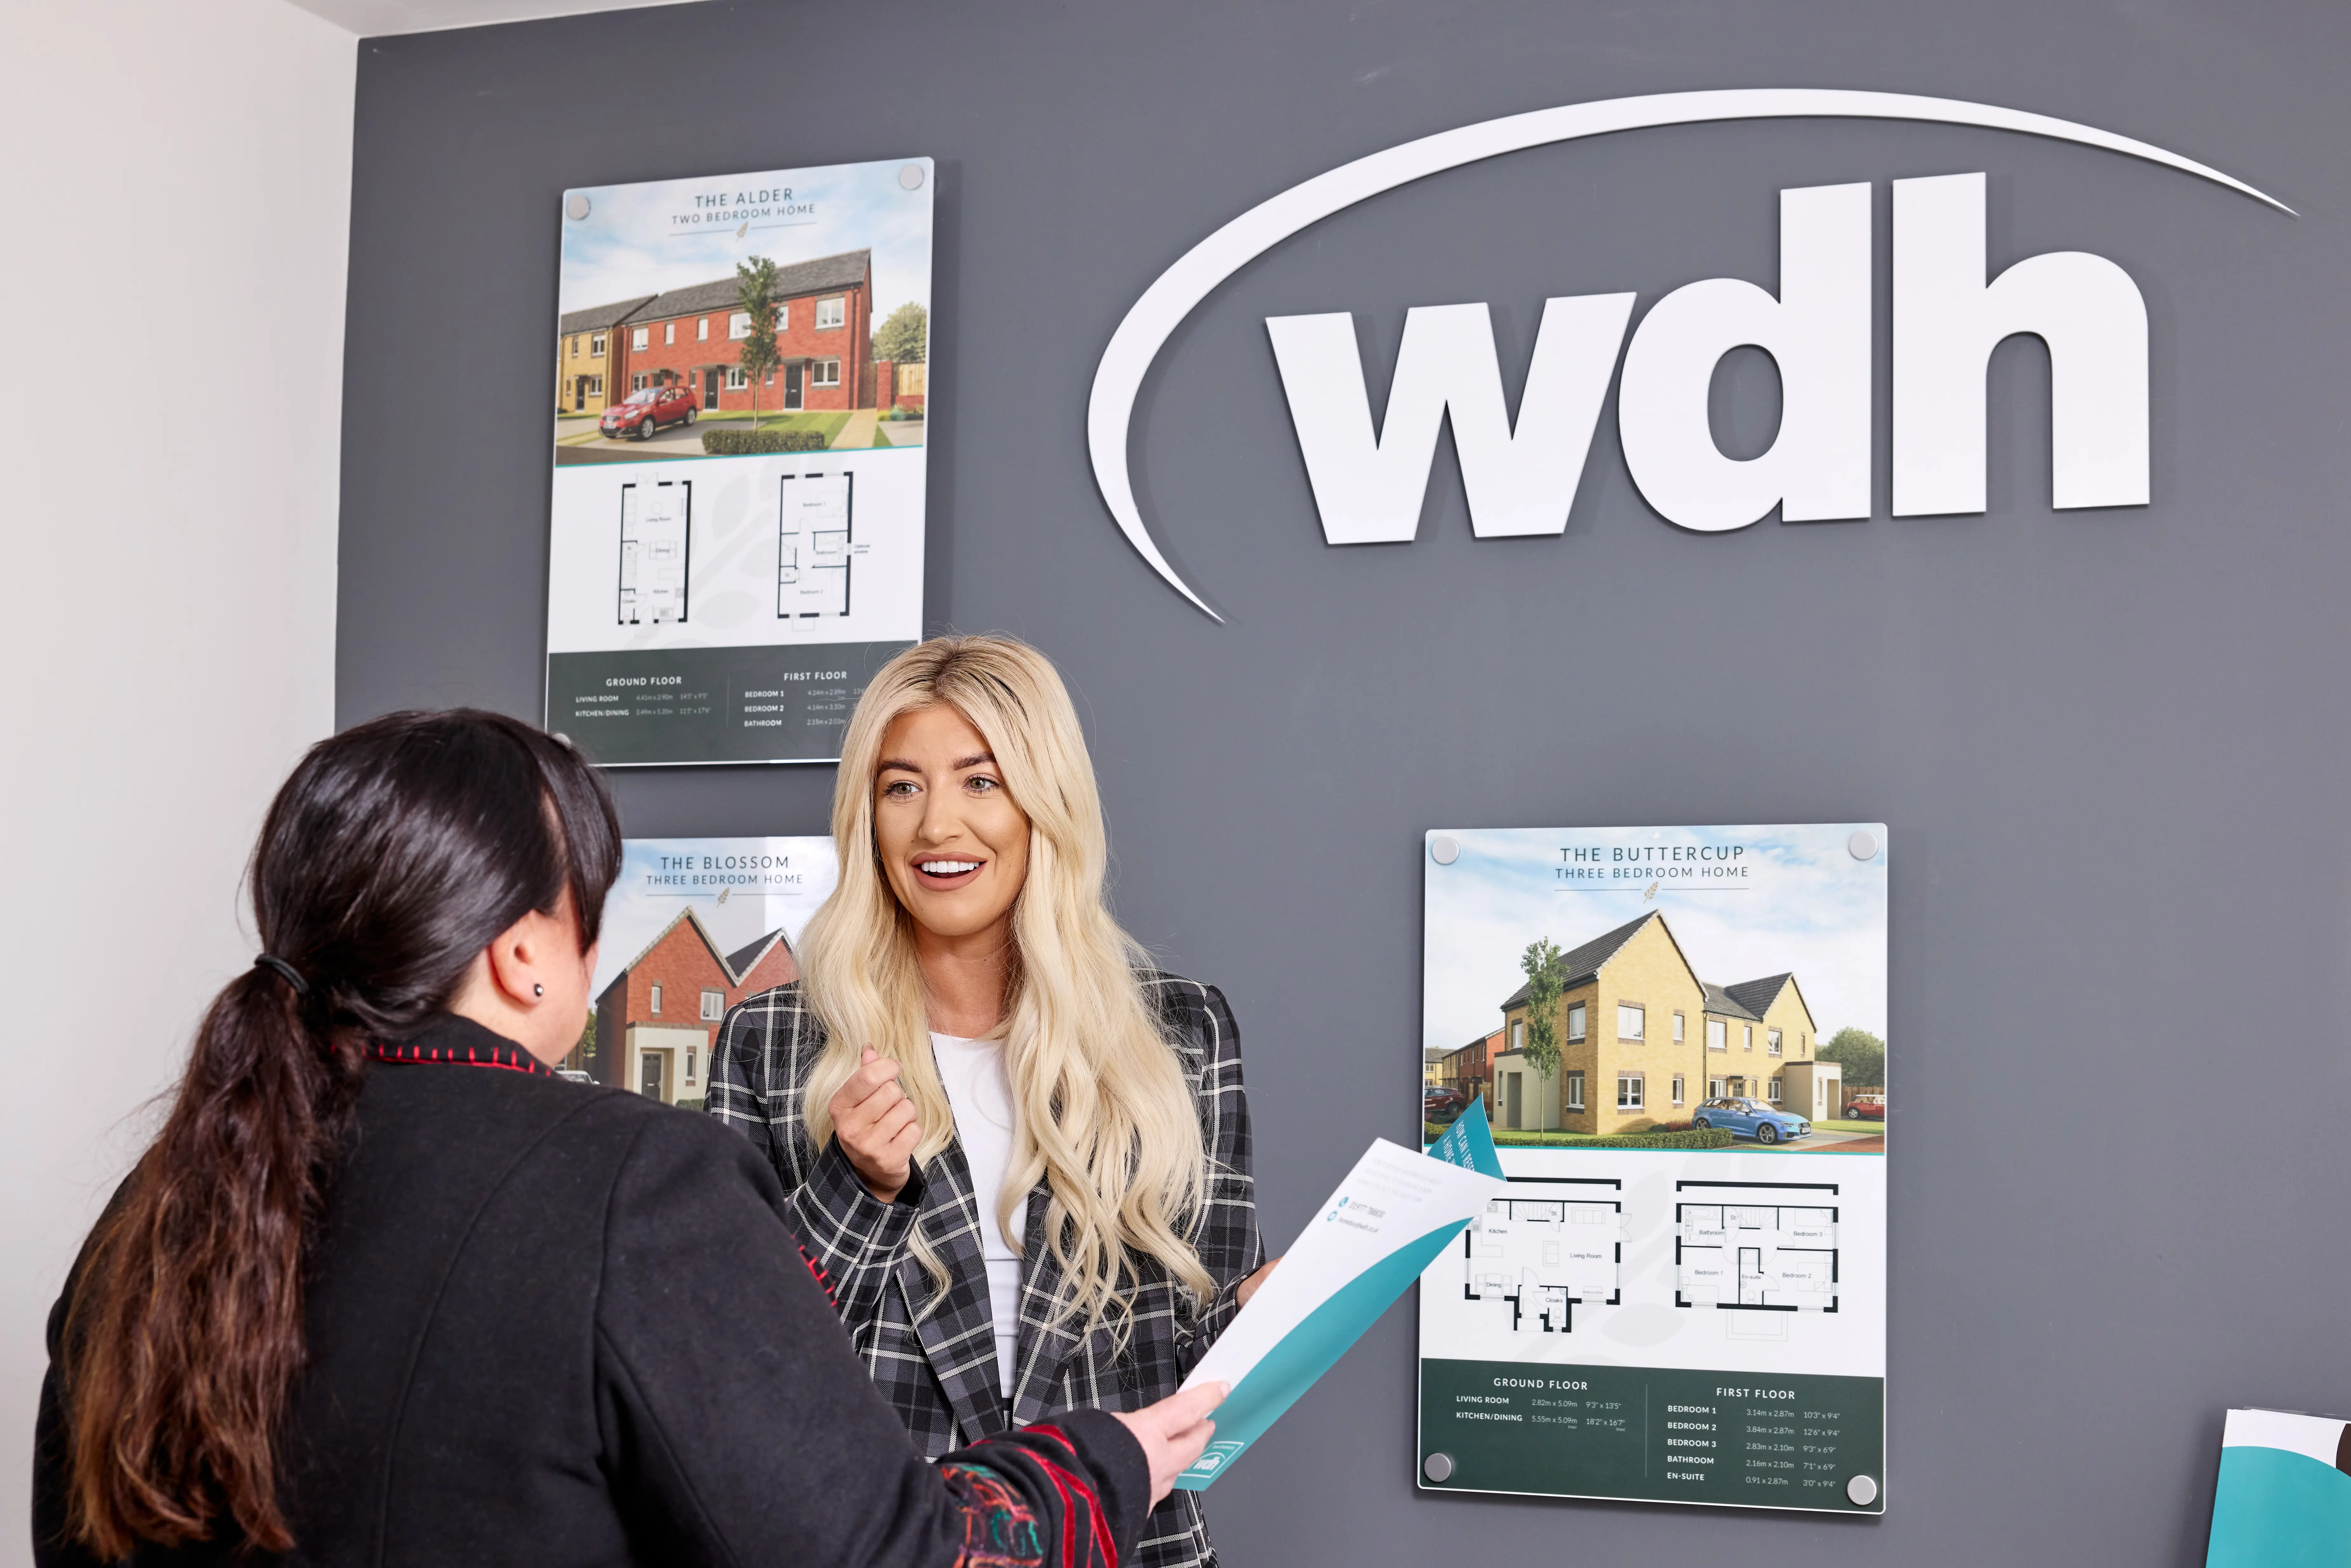 Image of a display wall showing some of our New Build properties.